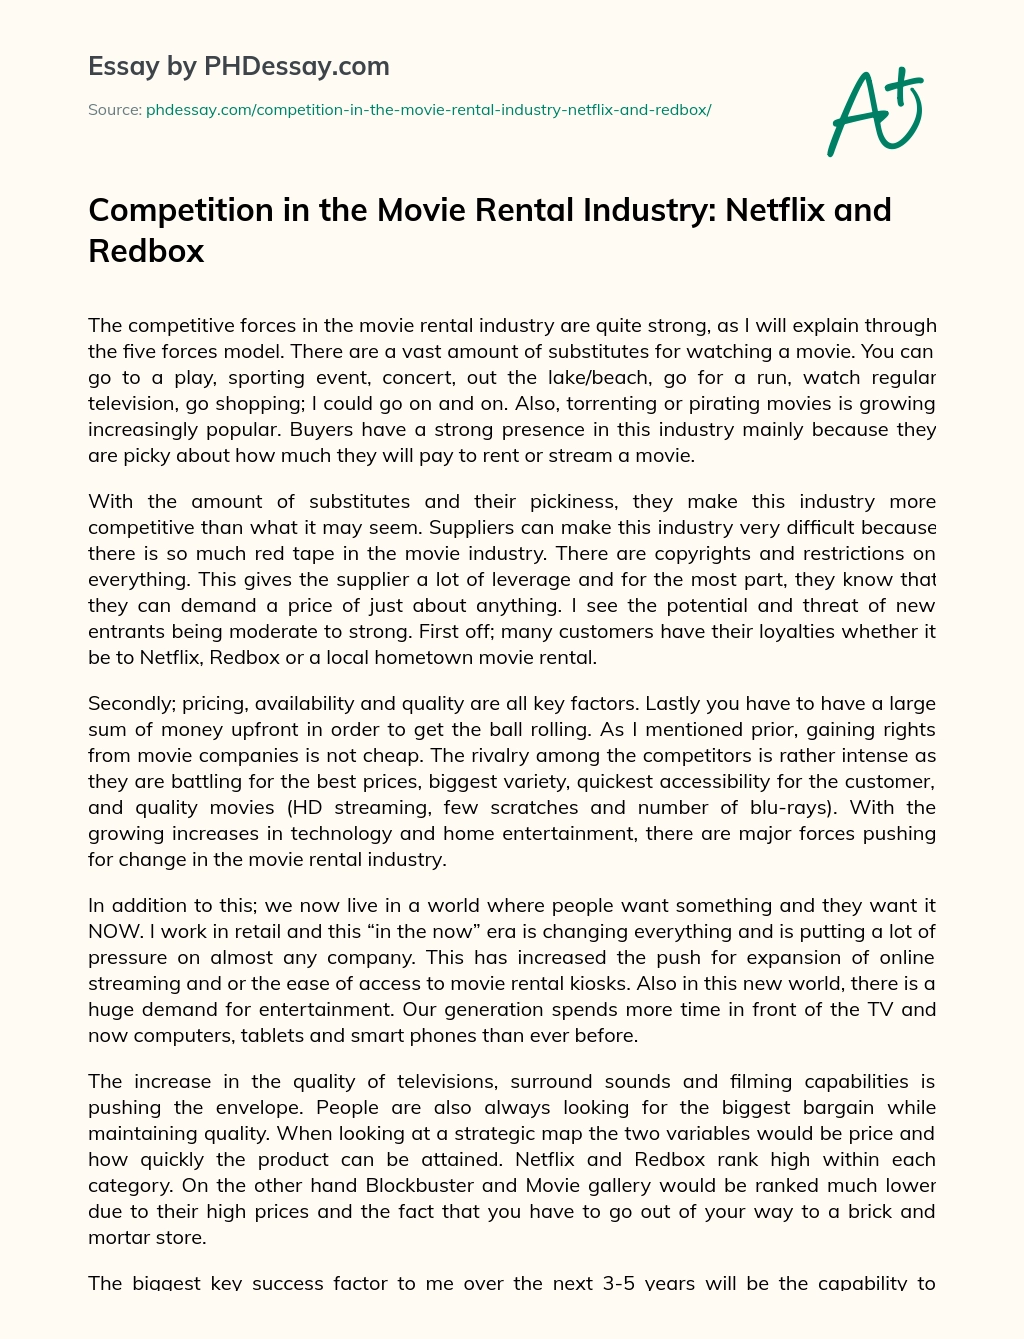 Competition in the Movie Rental Industry: Netflix and Redbox essay